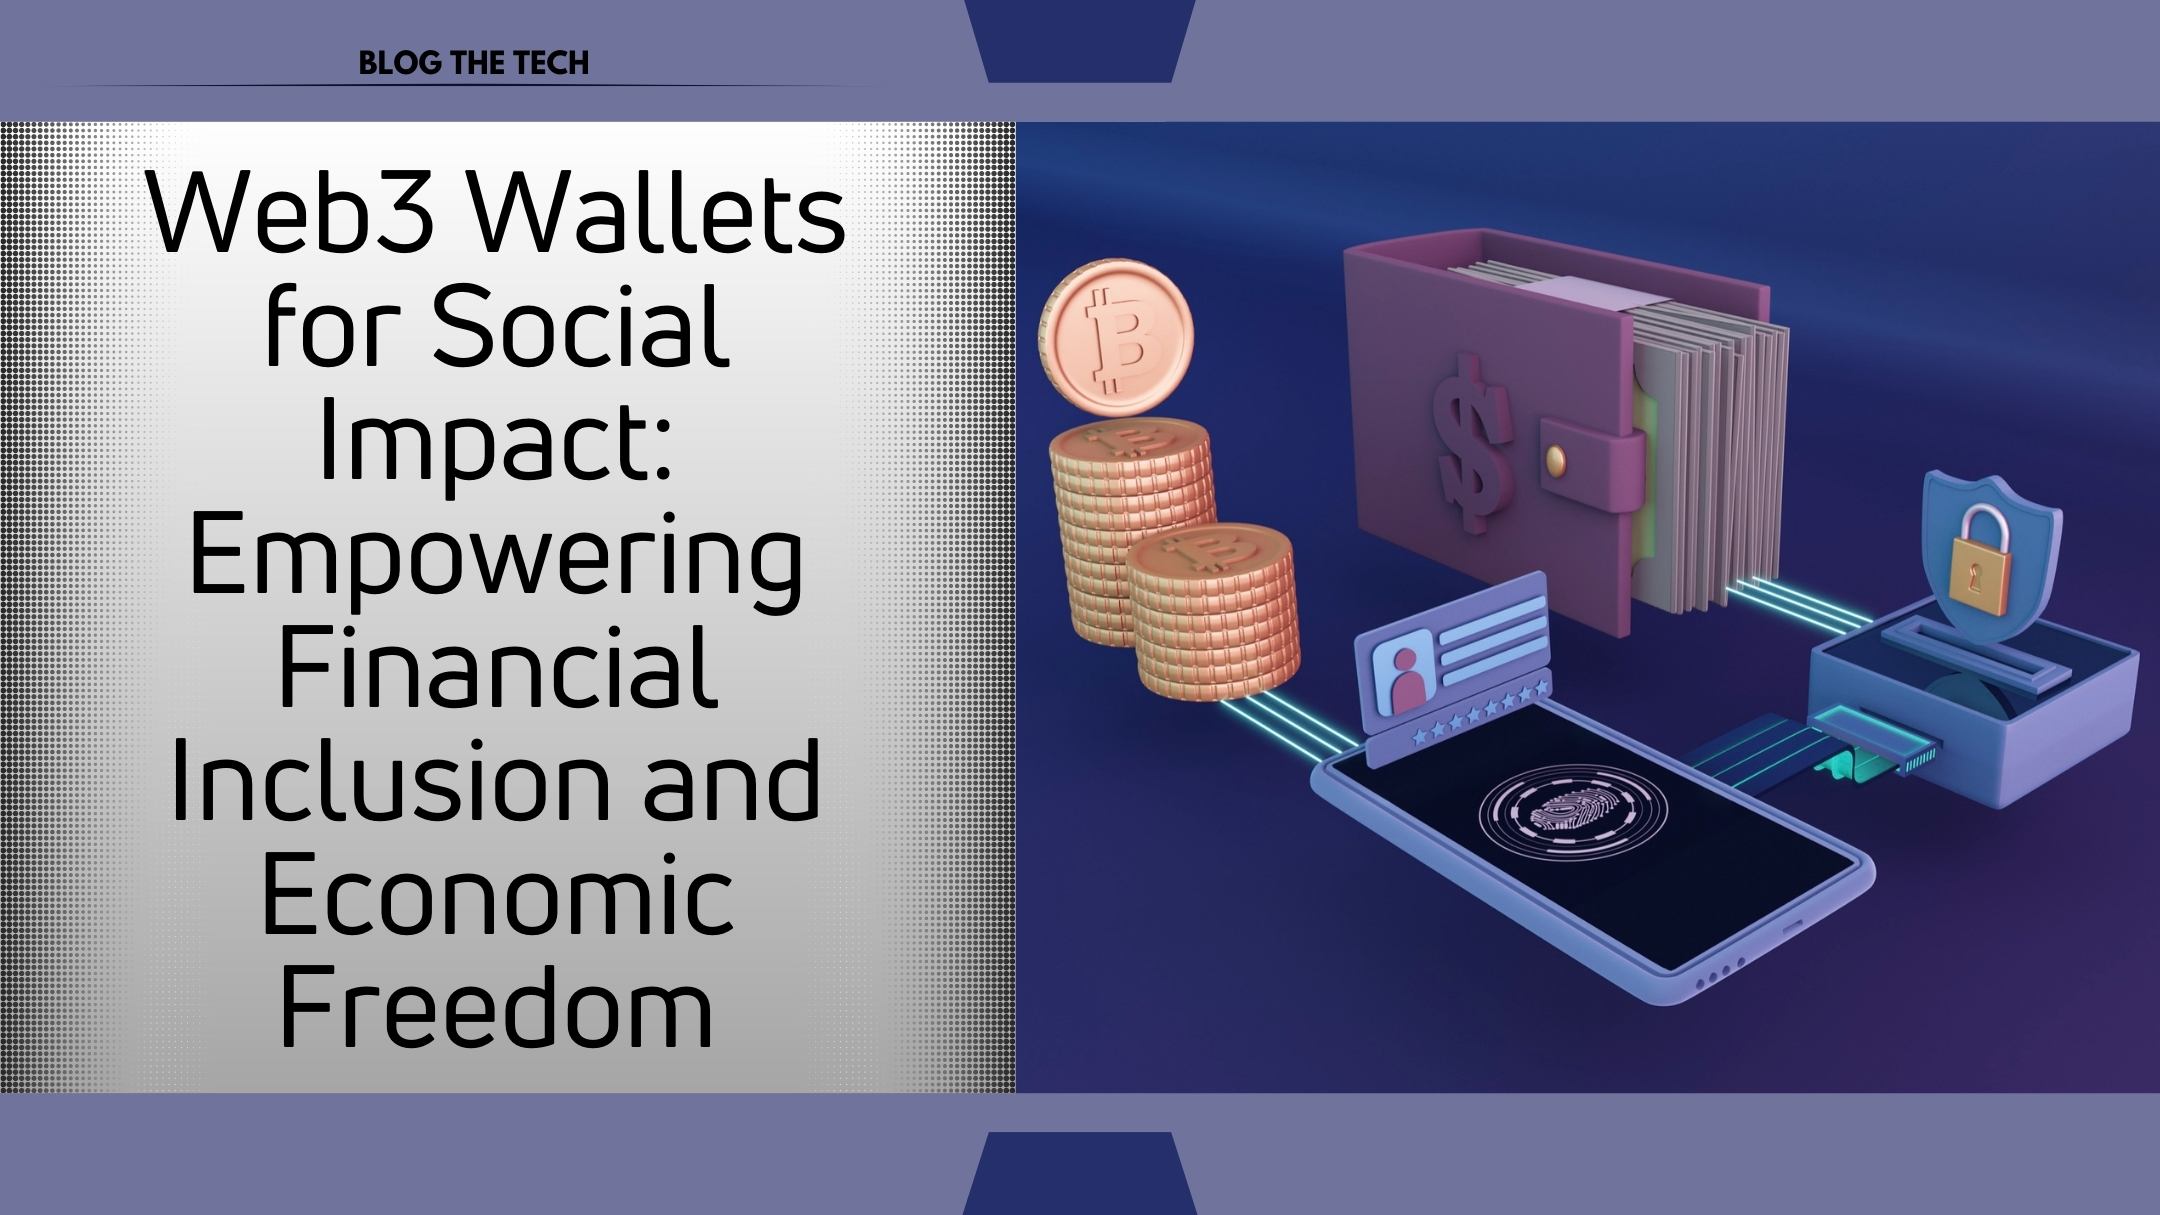 Web3 Wallets for Social Impact: Empowering Financial Inclusion and Economic Freedom